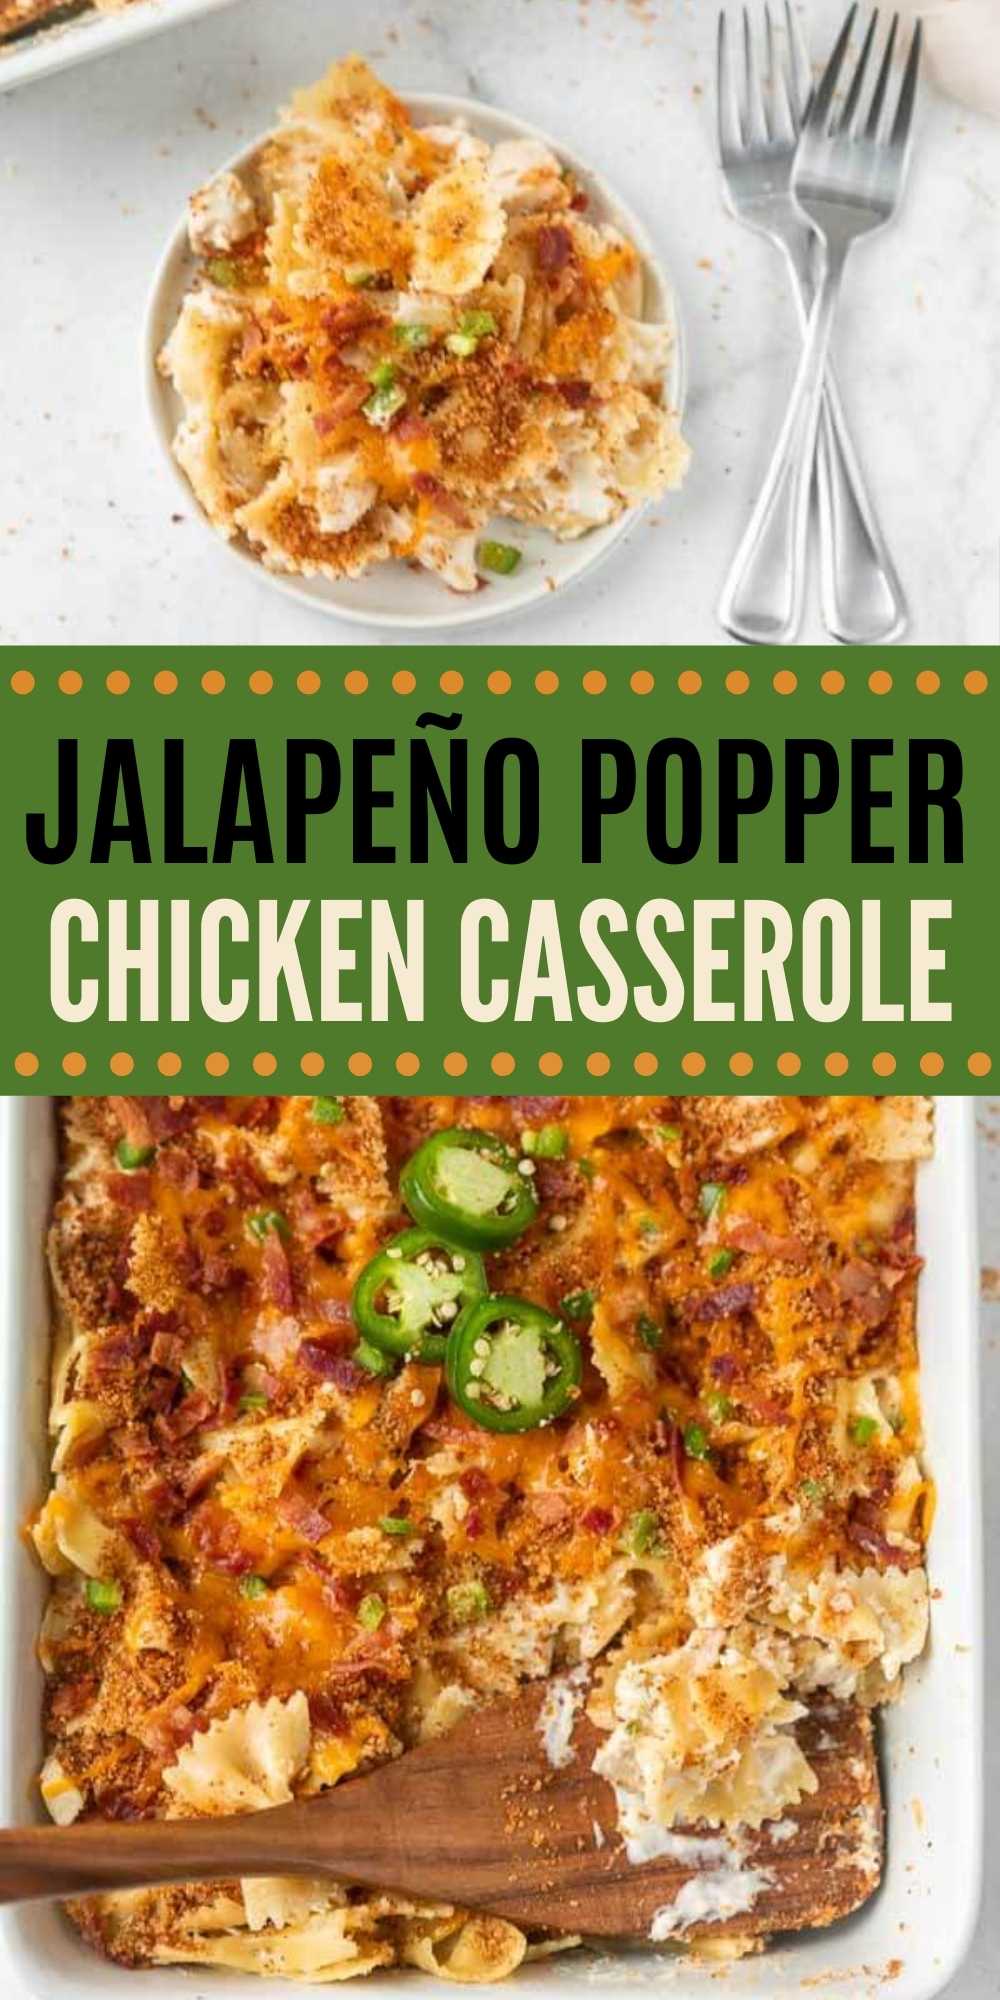 If you love cheesy jalapeño poppers, you are going to love Jalapeño popper chicken casserole recipe. Use precooked chicken and have dinner in 30 minutes. This is a great jalapeño popper chicken casserole with pasta that is easy to make and packed with flavor too! #eatingonadime #jalapeñorecipes #casseroles #chickenrecipes #jalapeñopopperrecipes 
